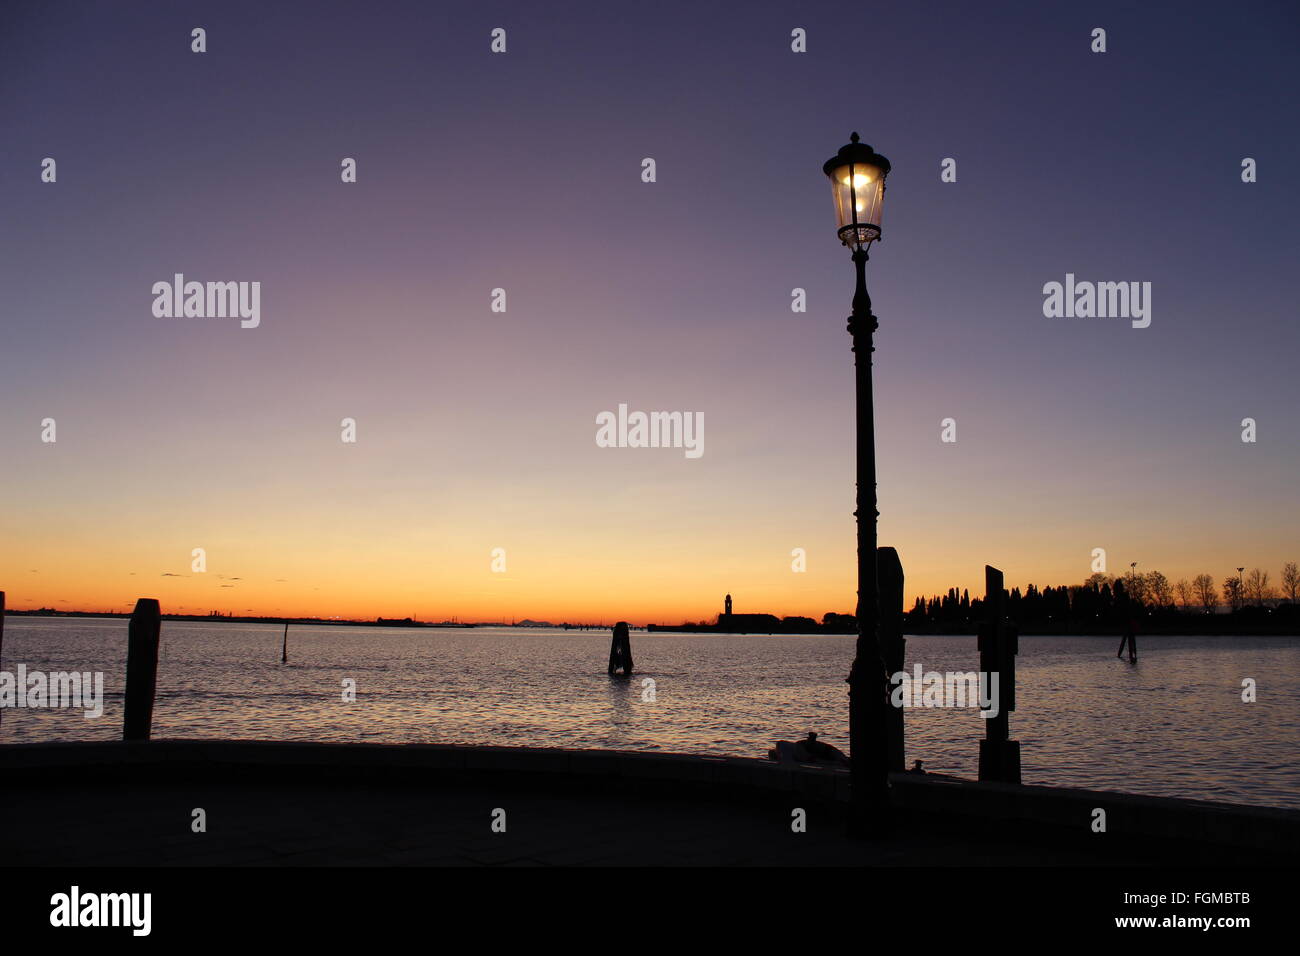 street light in the lake side on island Stock Photo